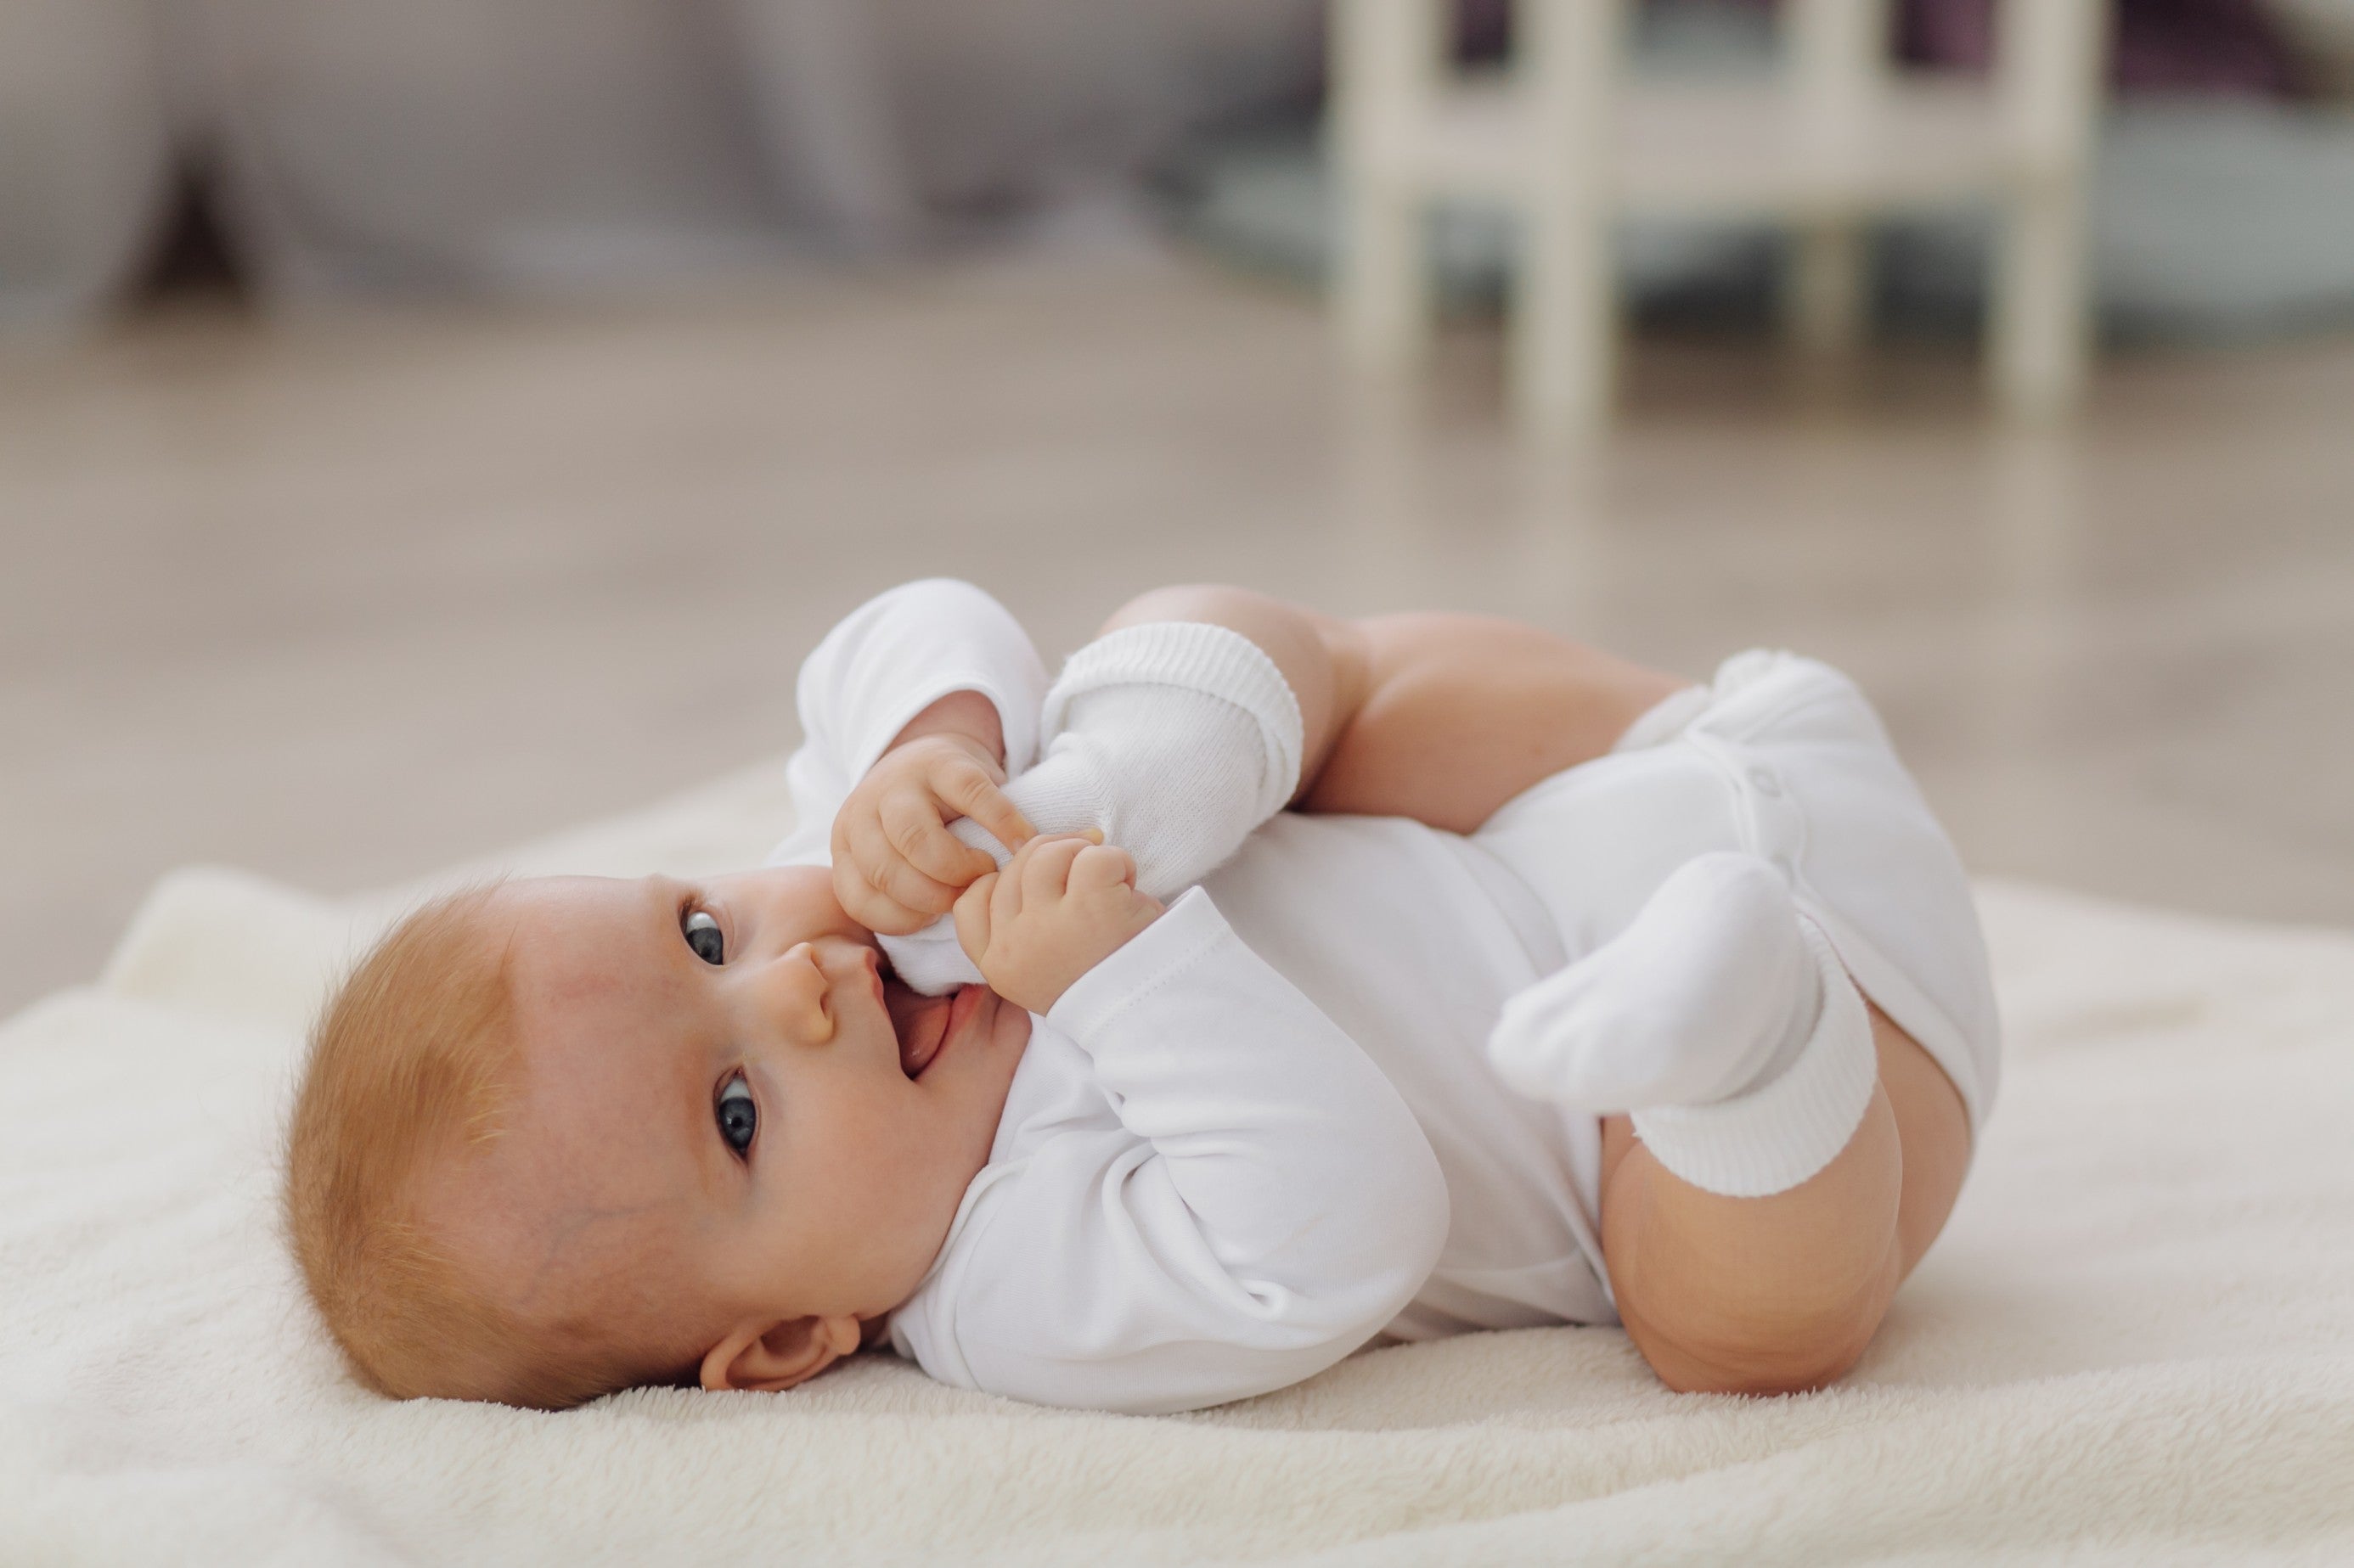 Diaper Blowout: Causes, Cleanup, and Prevention